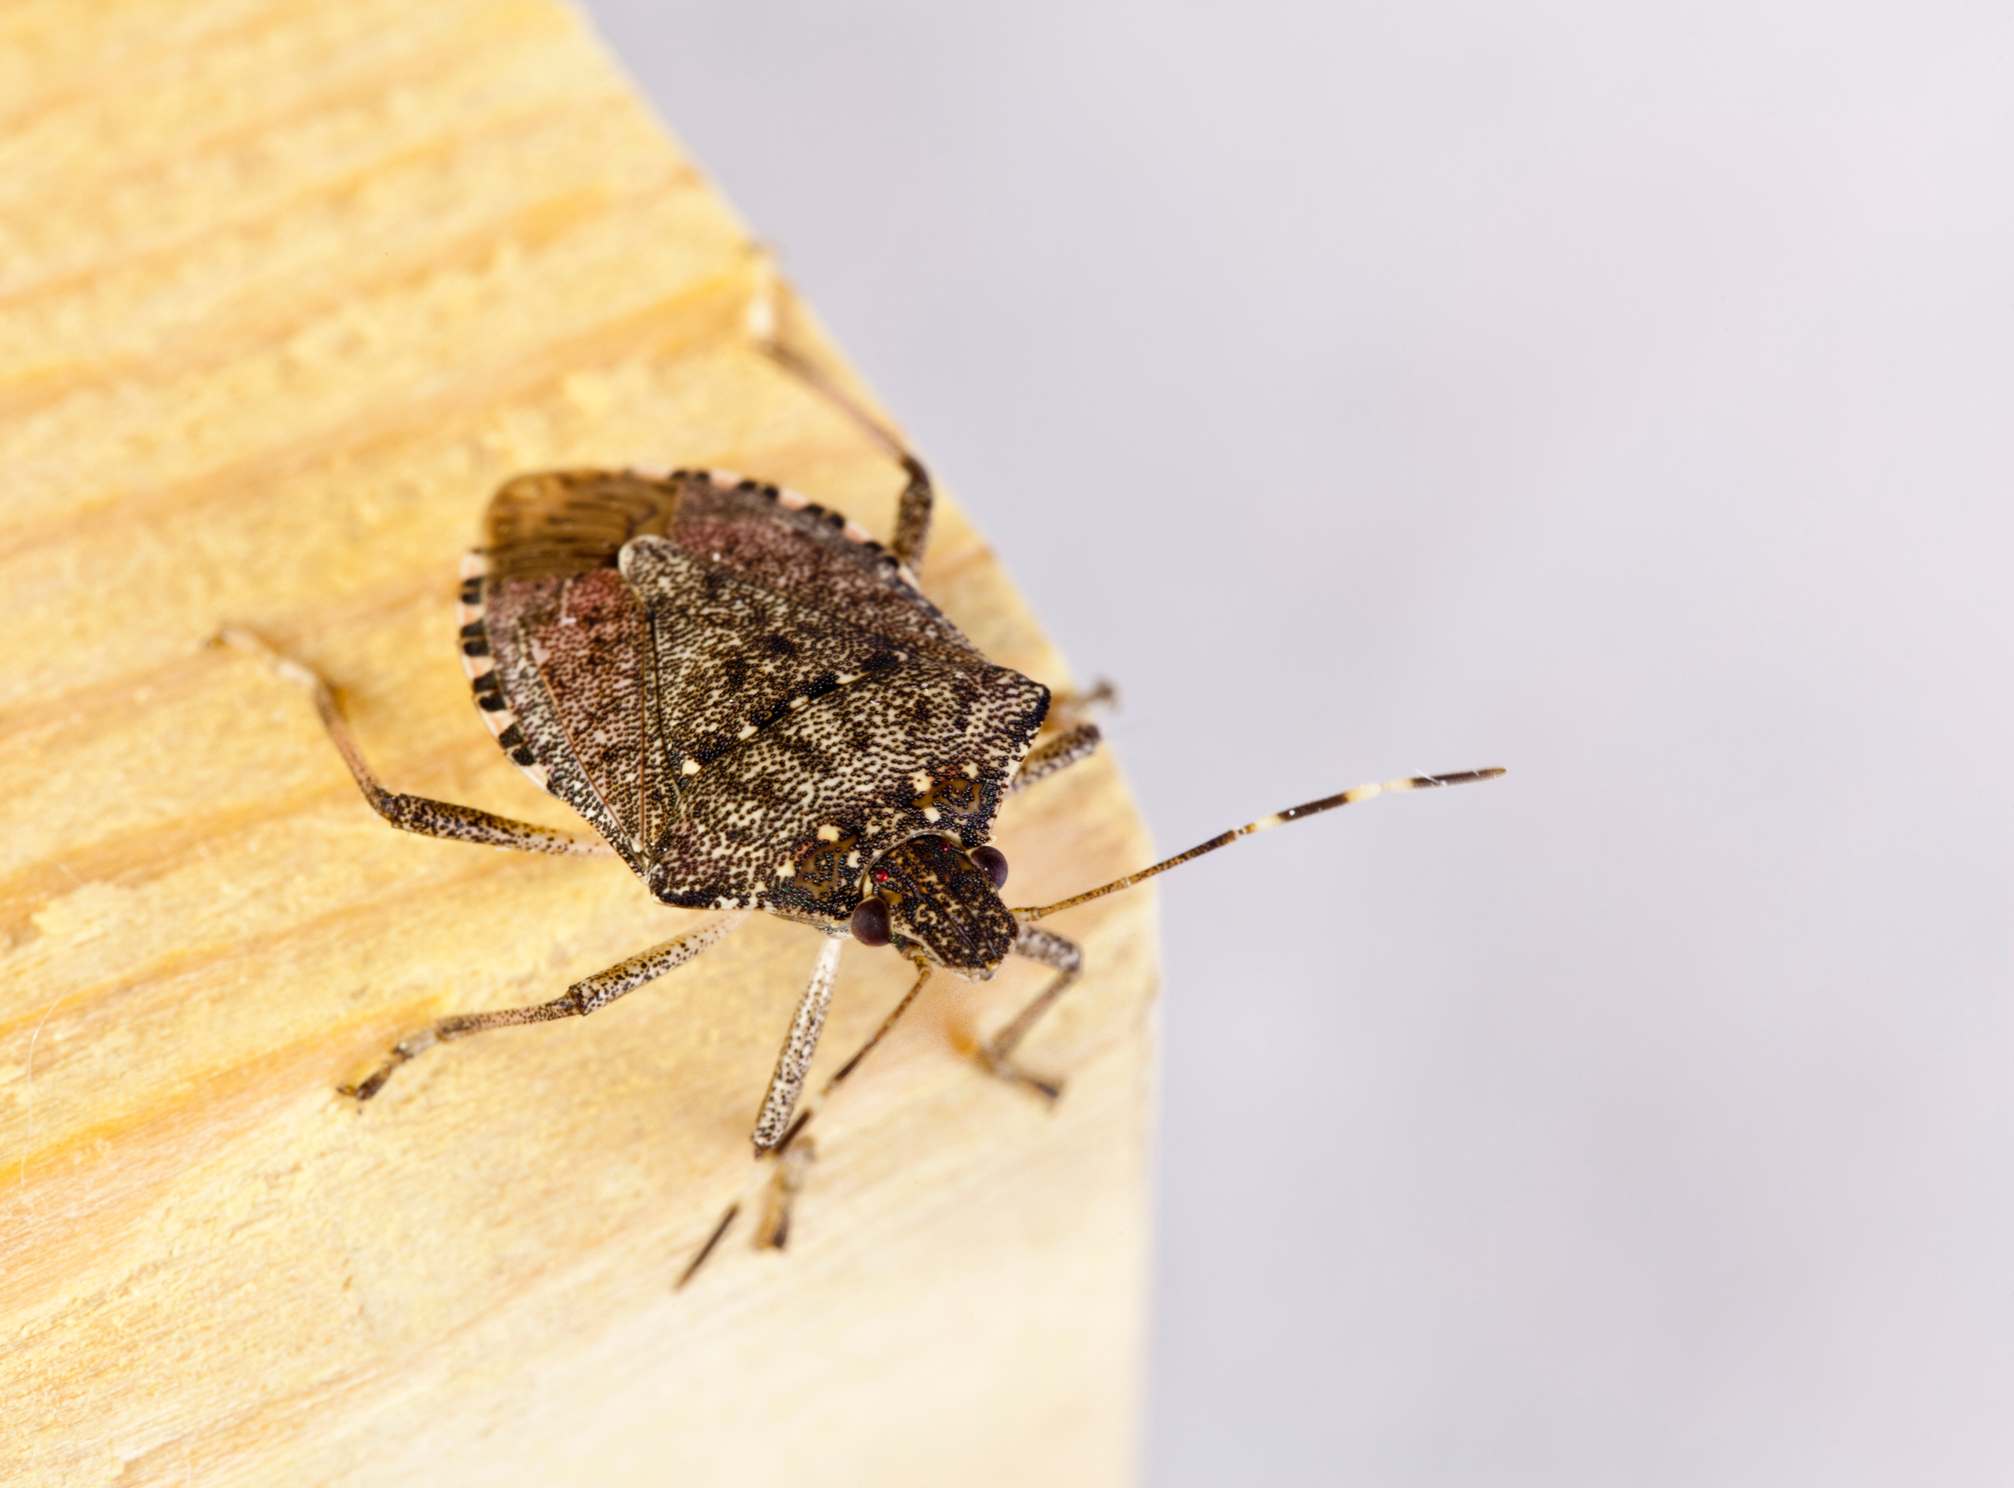 Do you know why stink bugs stink? What do they smell like?